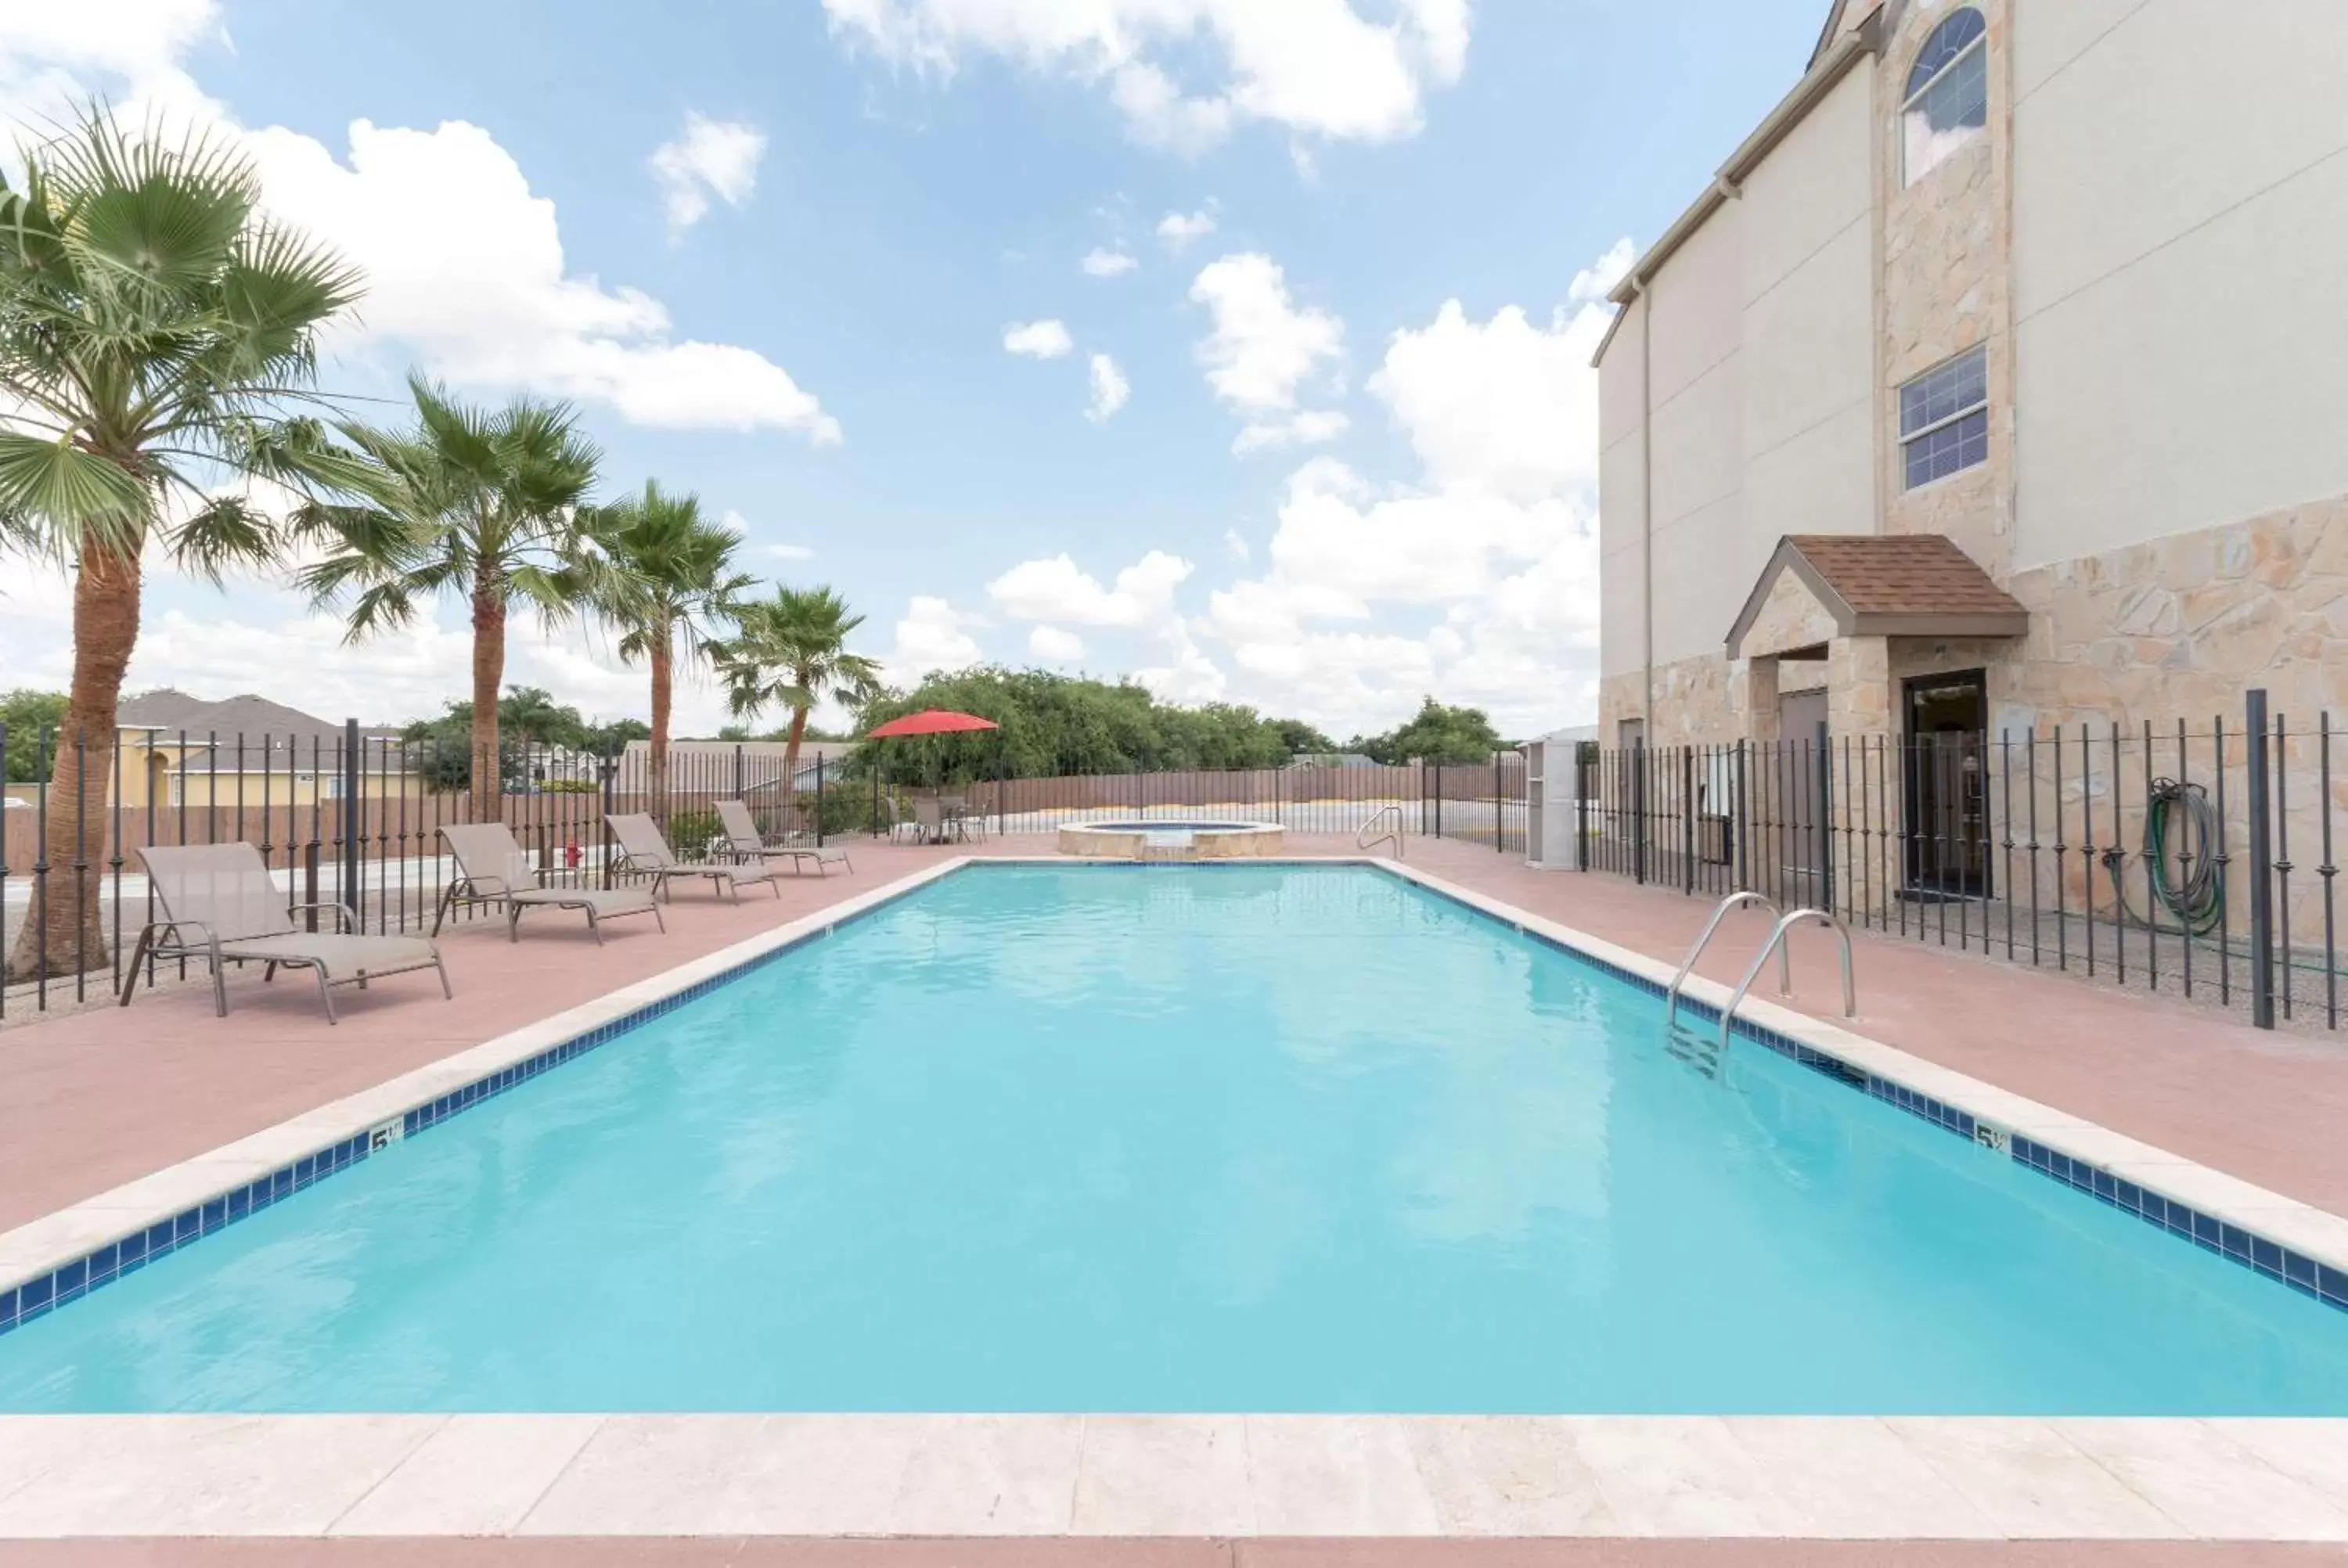 On site, Swimming Pool in Microtel Inn and Suites Eagle Pass